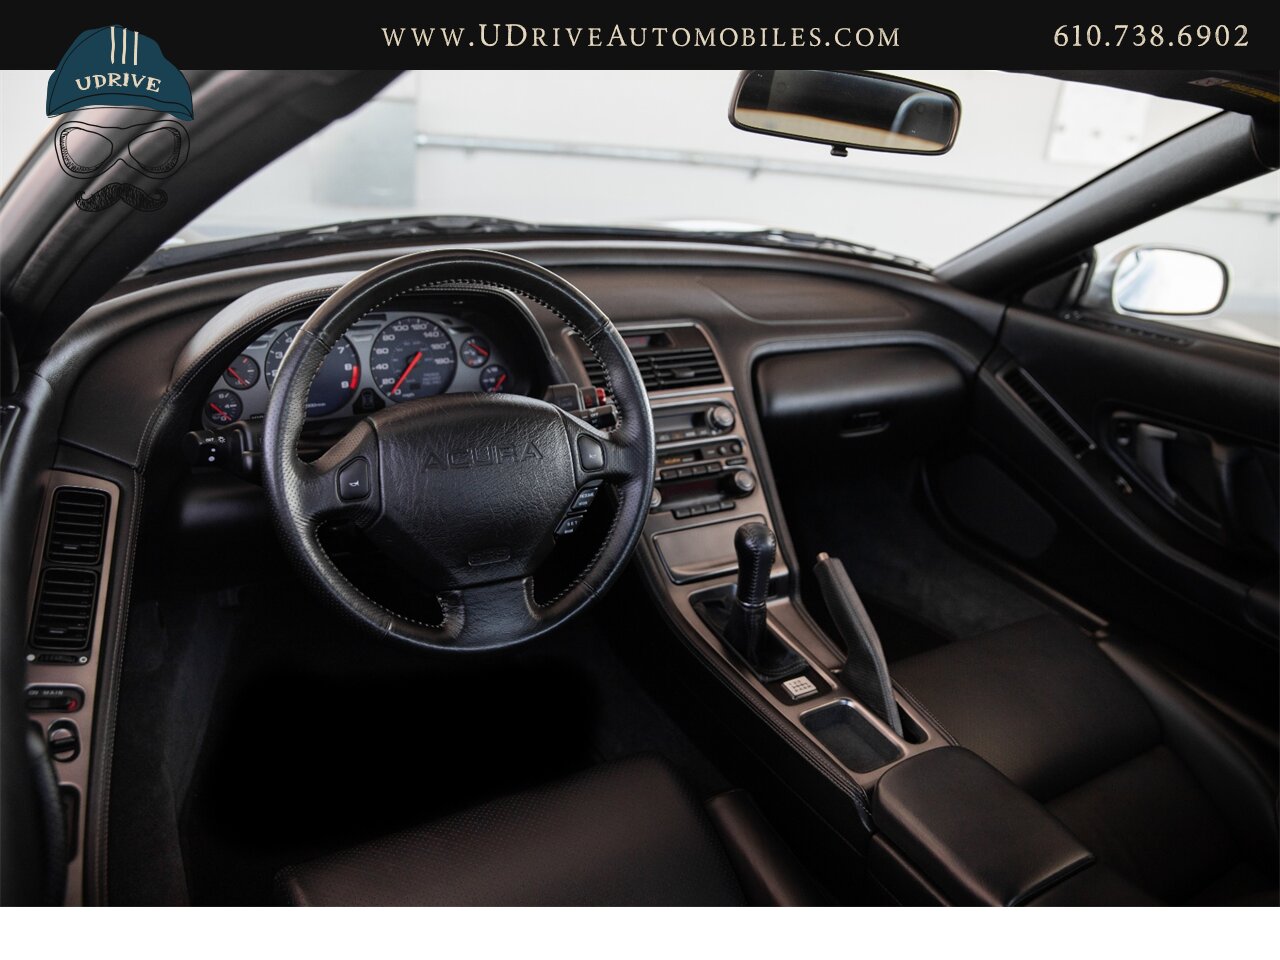 2002 Acura NSX NSX-T 9k Miles 6 Speed Manual Service History  Collector Grade - Photo 29 - West Chester, PA 19382